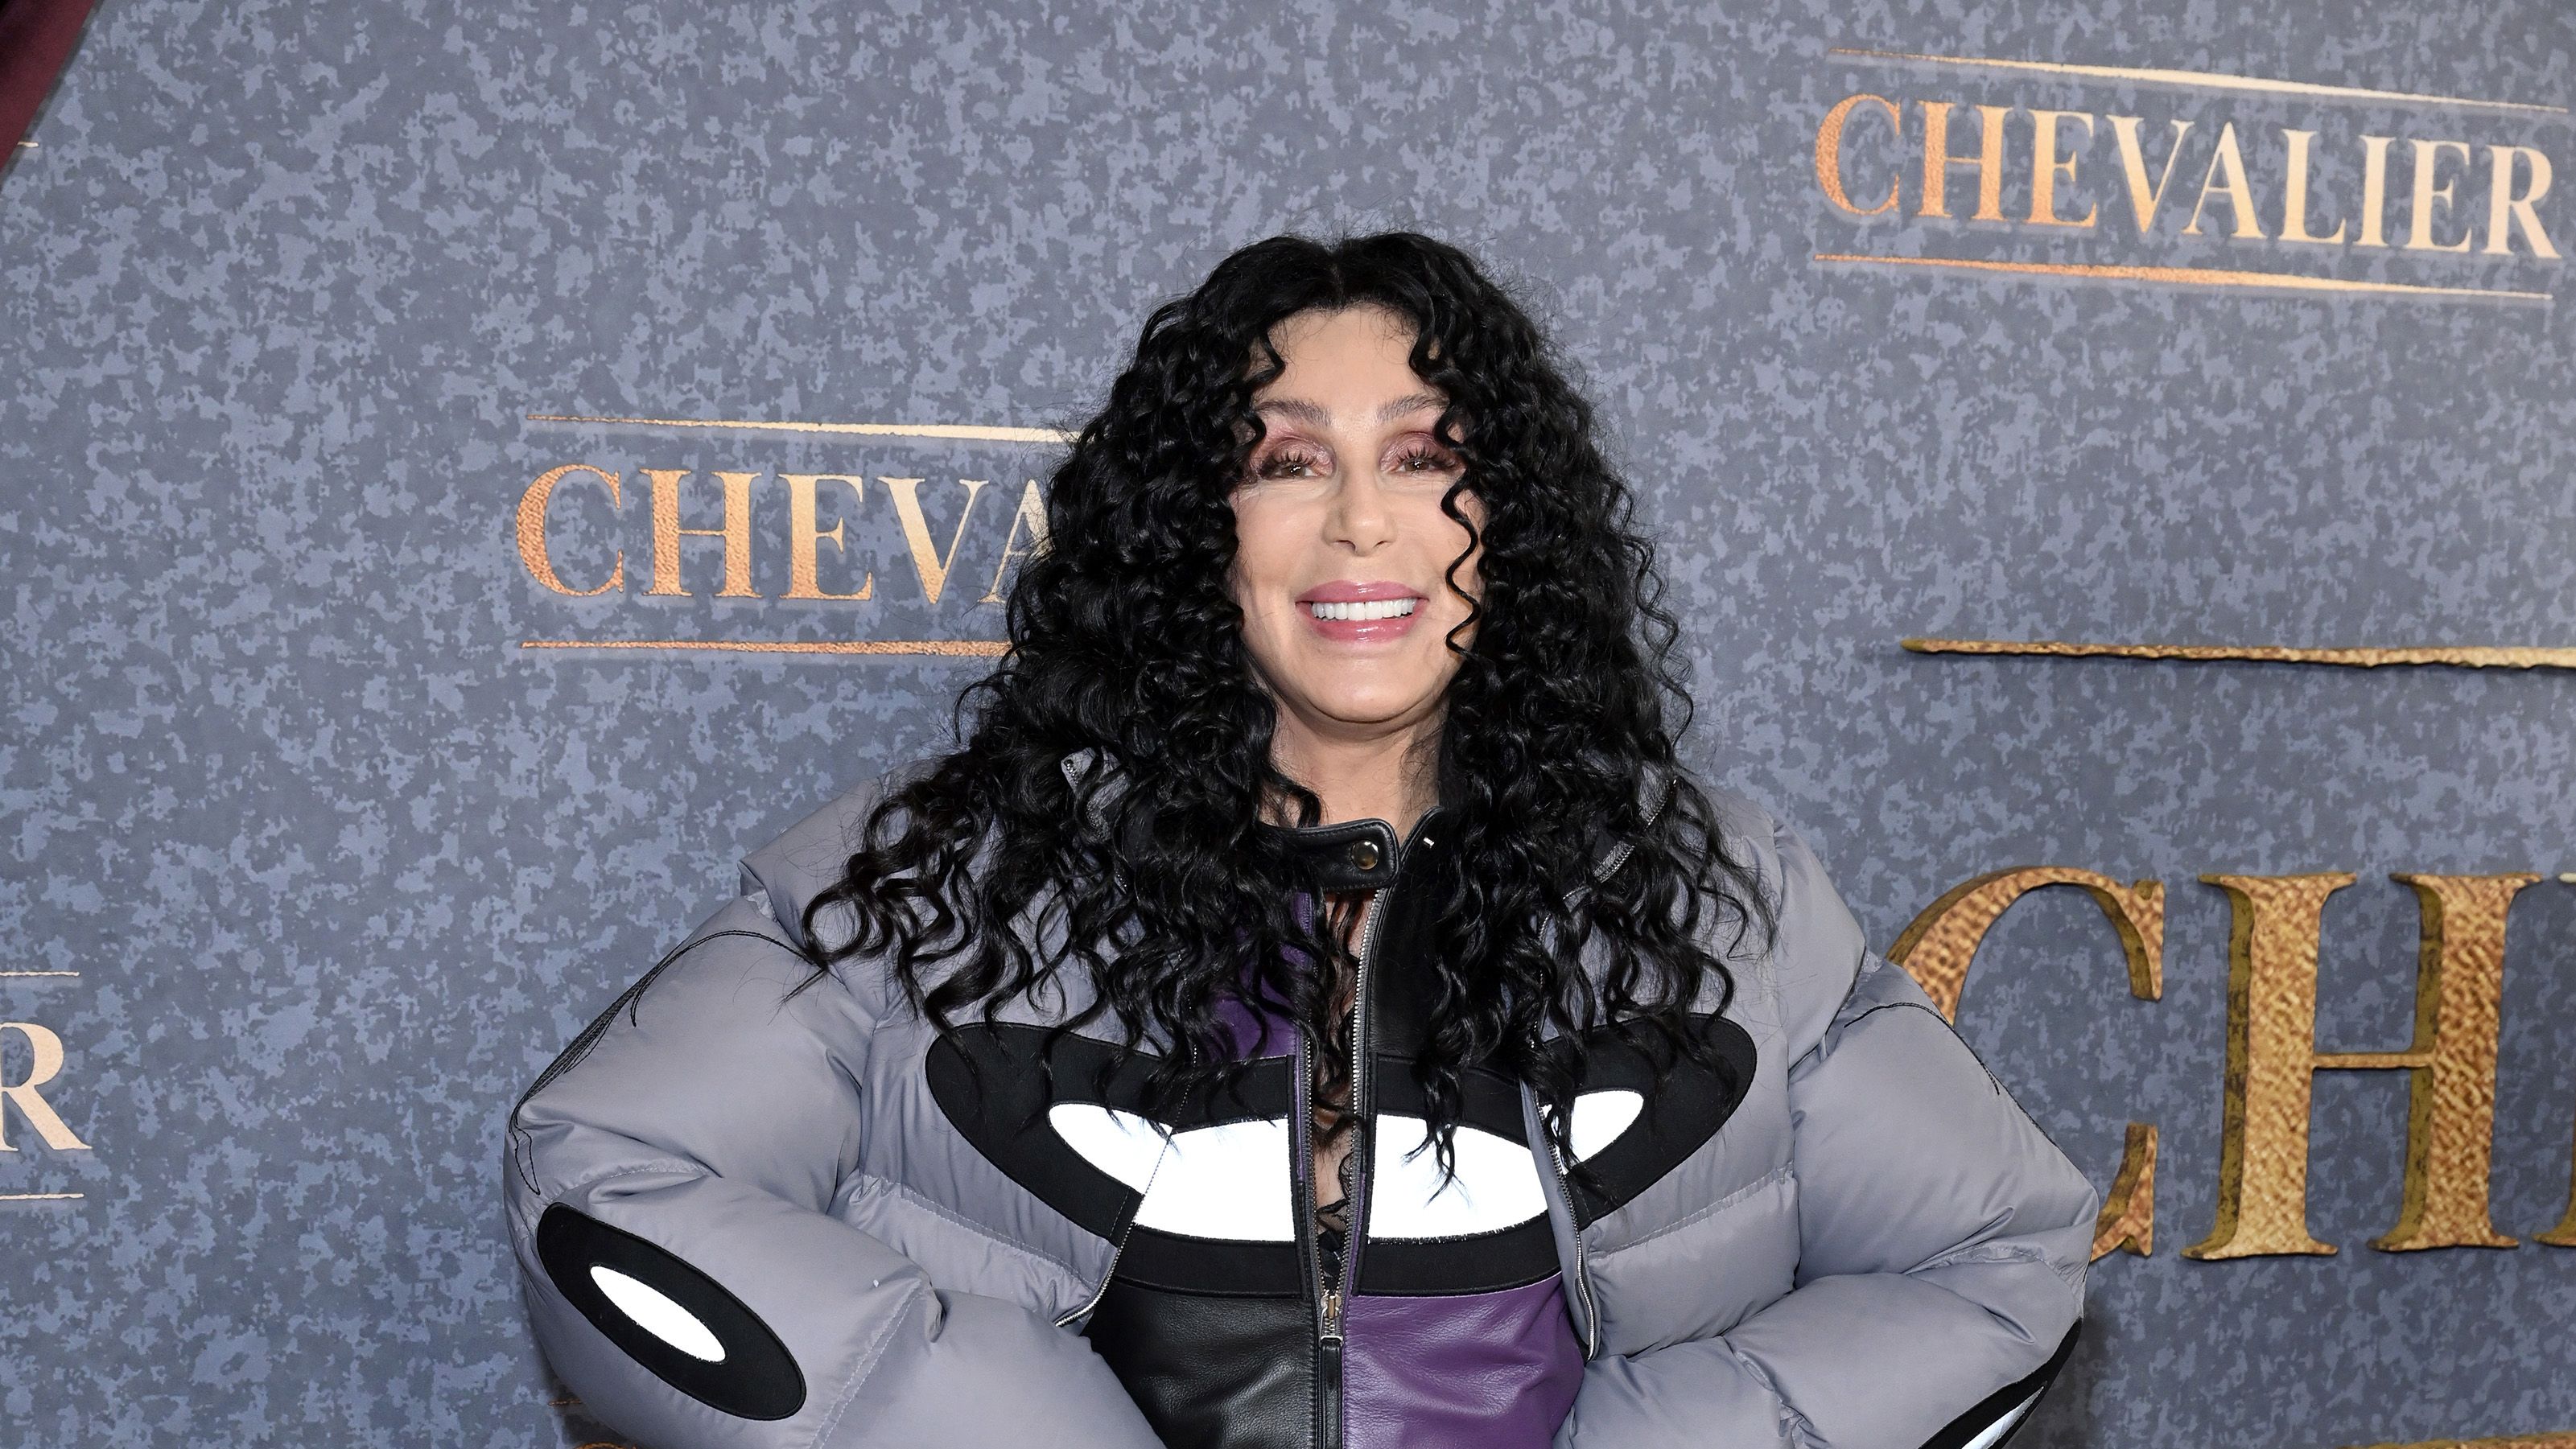 Cher, 77, Is Wondering When She'll Feel Old